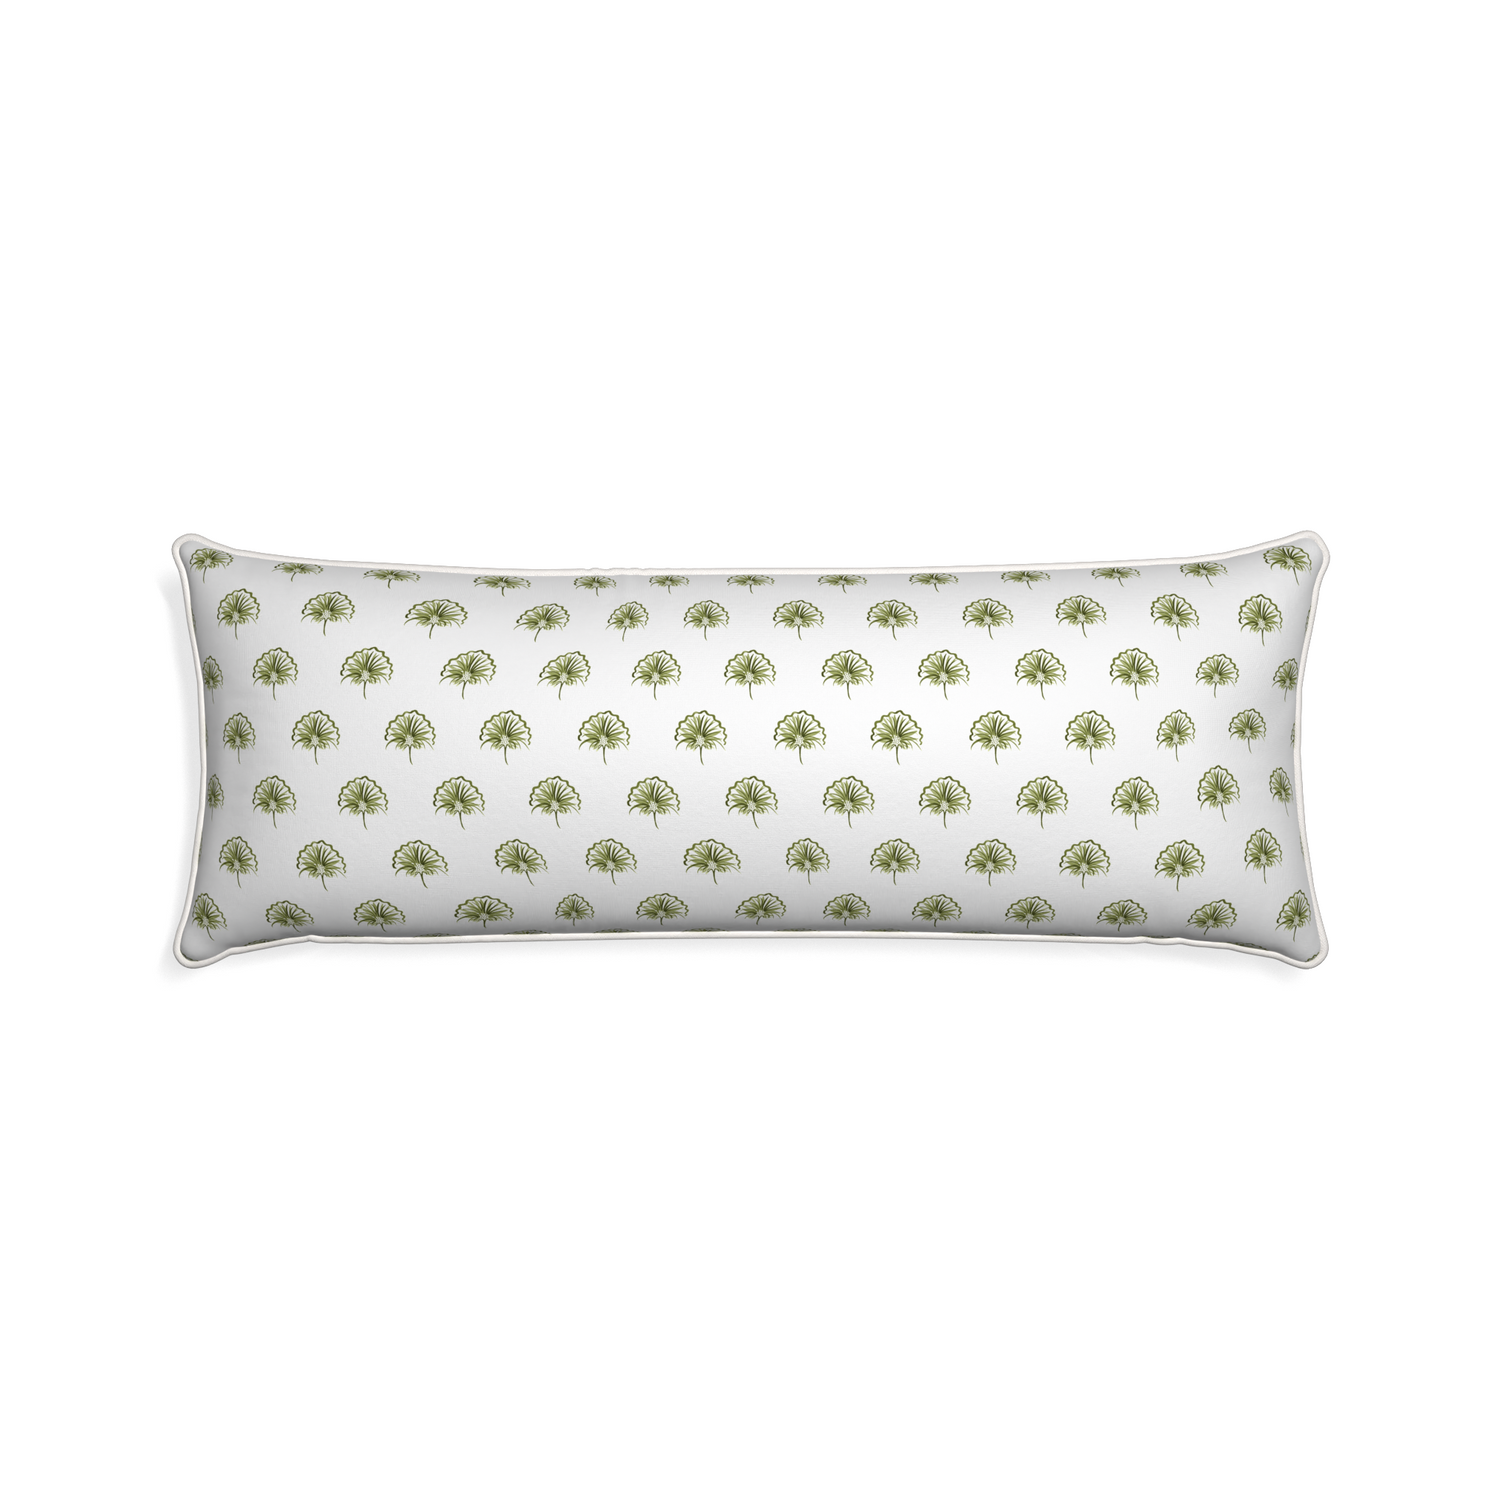 Xl-lumbar penelope moss custom green floralpillow with snow piping on white background